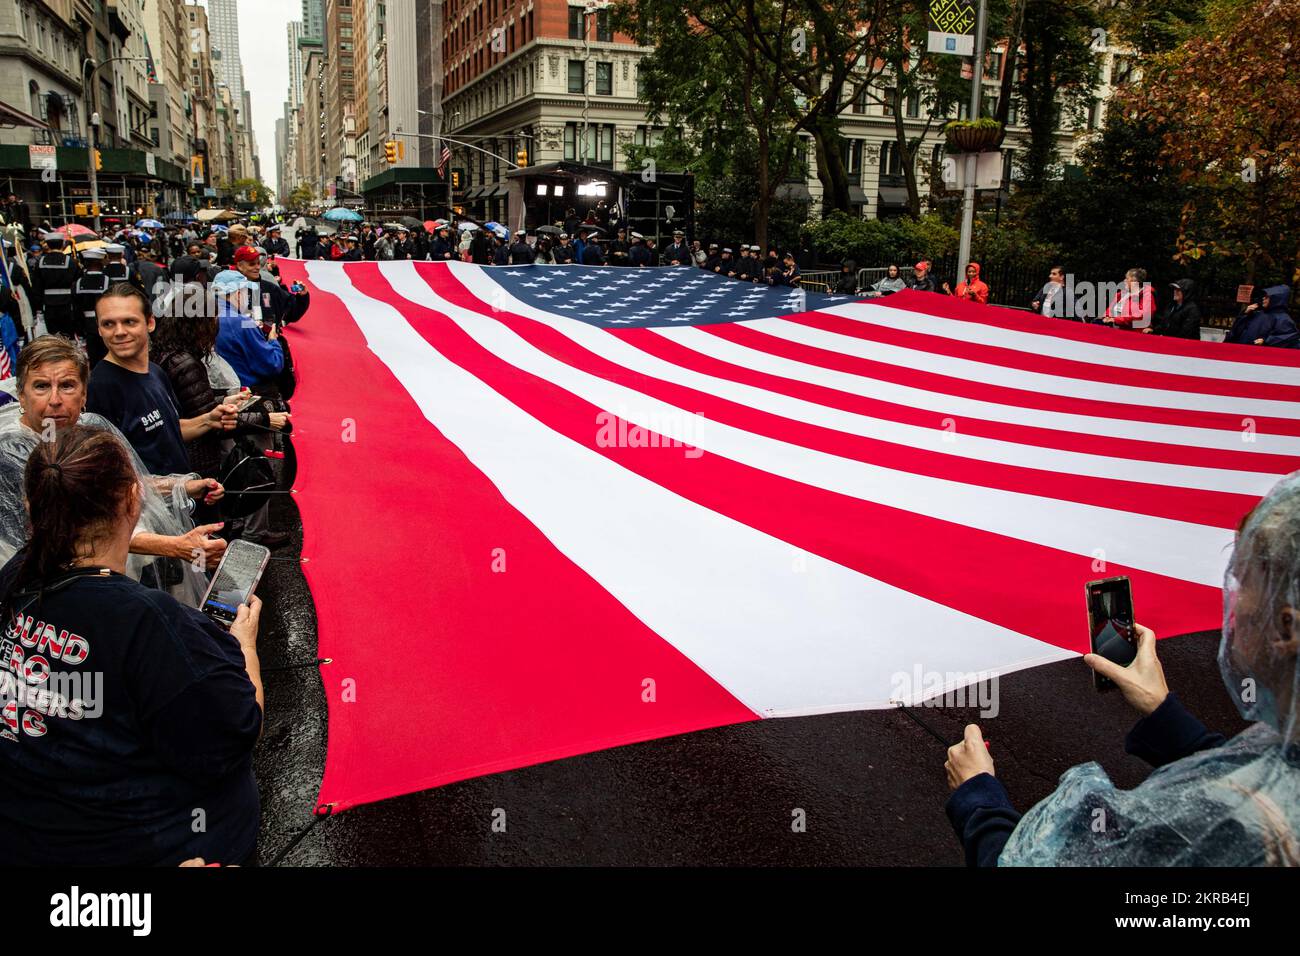 A jumbo-sized American flag is unfurled at the New York City Veterans Day Parade, Nov. 11, 2022. Sailors assigned to the San Antonio-class amphibious transport dock ship USS Arlington (LPD 24) and II Marine Expeditionary Force (MEF) Marines are participating in events in and around New York City during the week-long Veterans Day New York celebration to honor the service and sacrifice of the nation’s veterans. Stock Photo